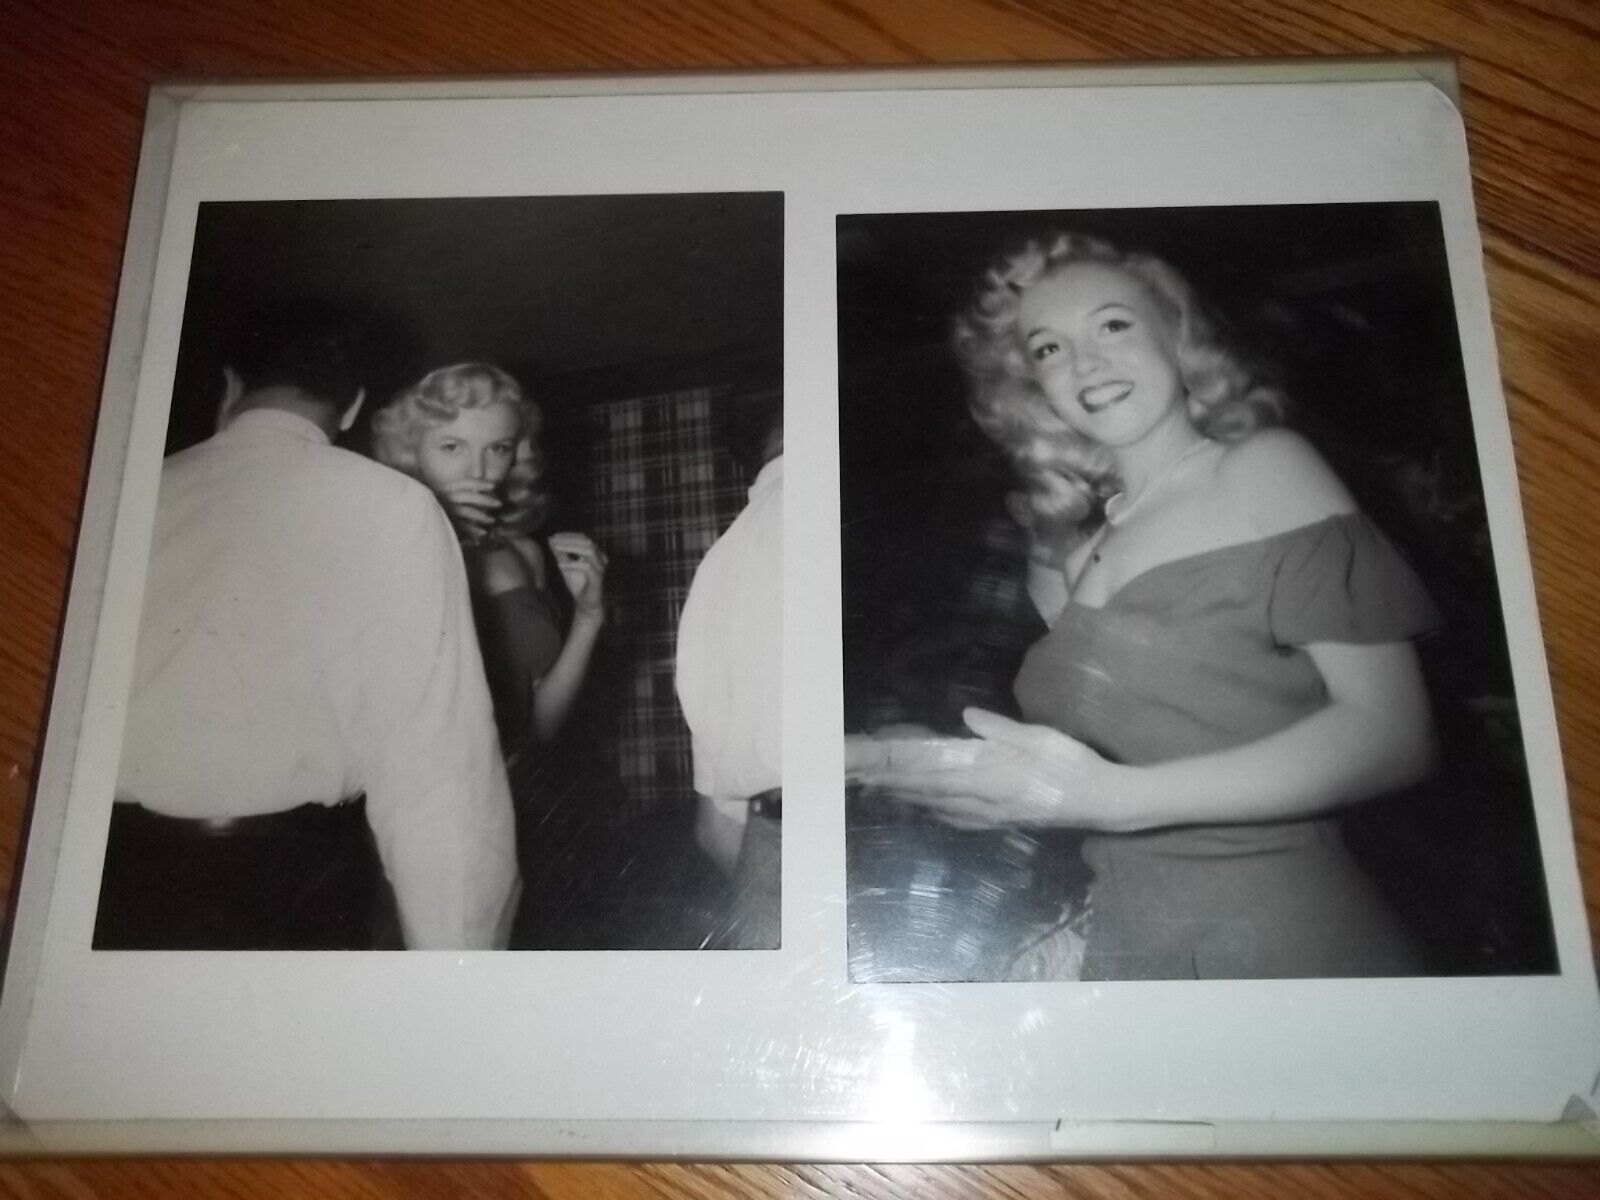 EARLY MARILYN MONROE EXTREMELY RARE VINTAGE PHOTOGRAPHS. Impossible Find